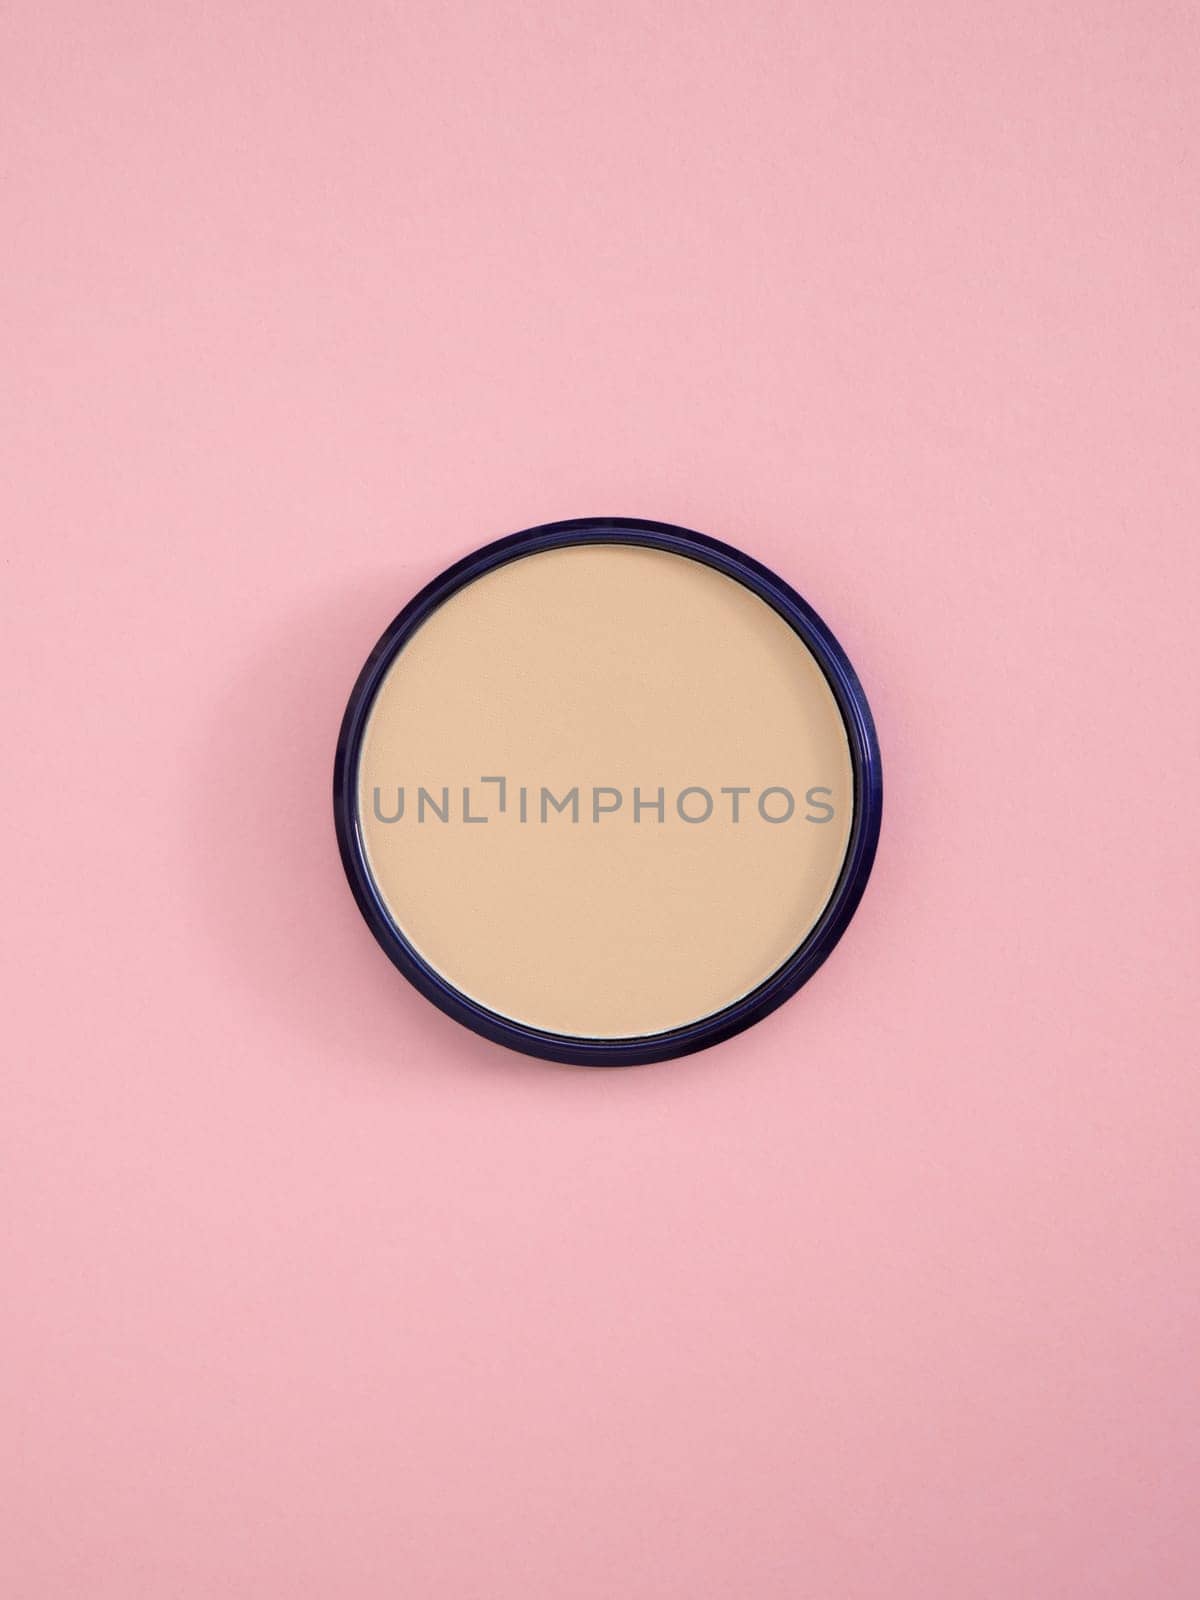 Beige facial concealer powder. Top view of nude face powder in round case on pink paper background. Fashion cosmetic, makeup product. Bronzer and concealer texture for perfect complexion. Copy space by Halina